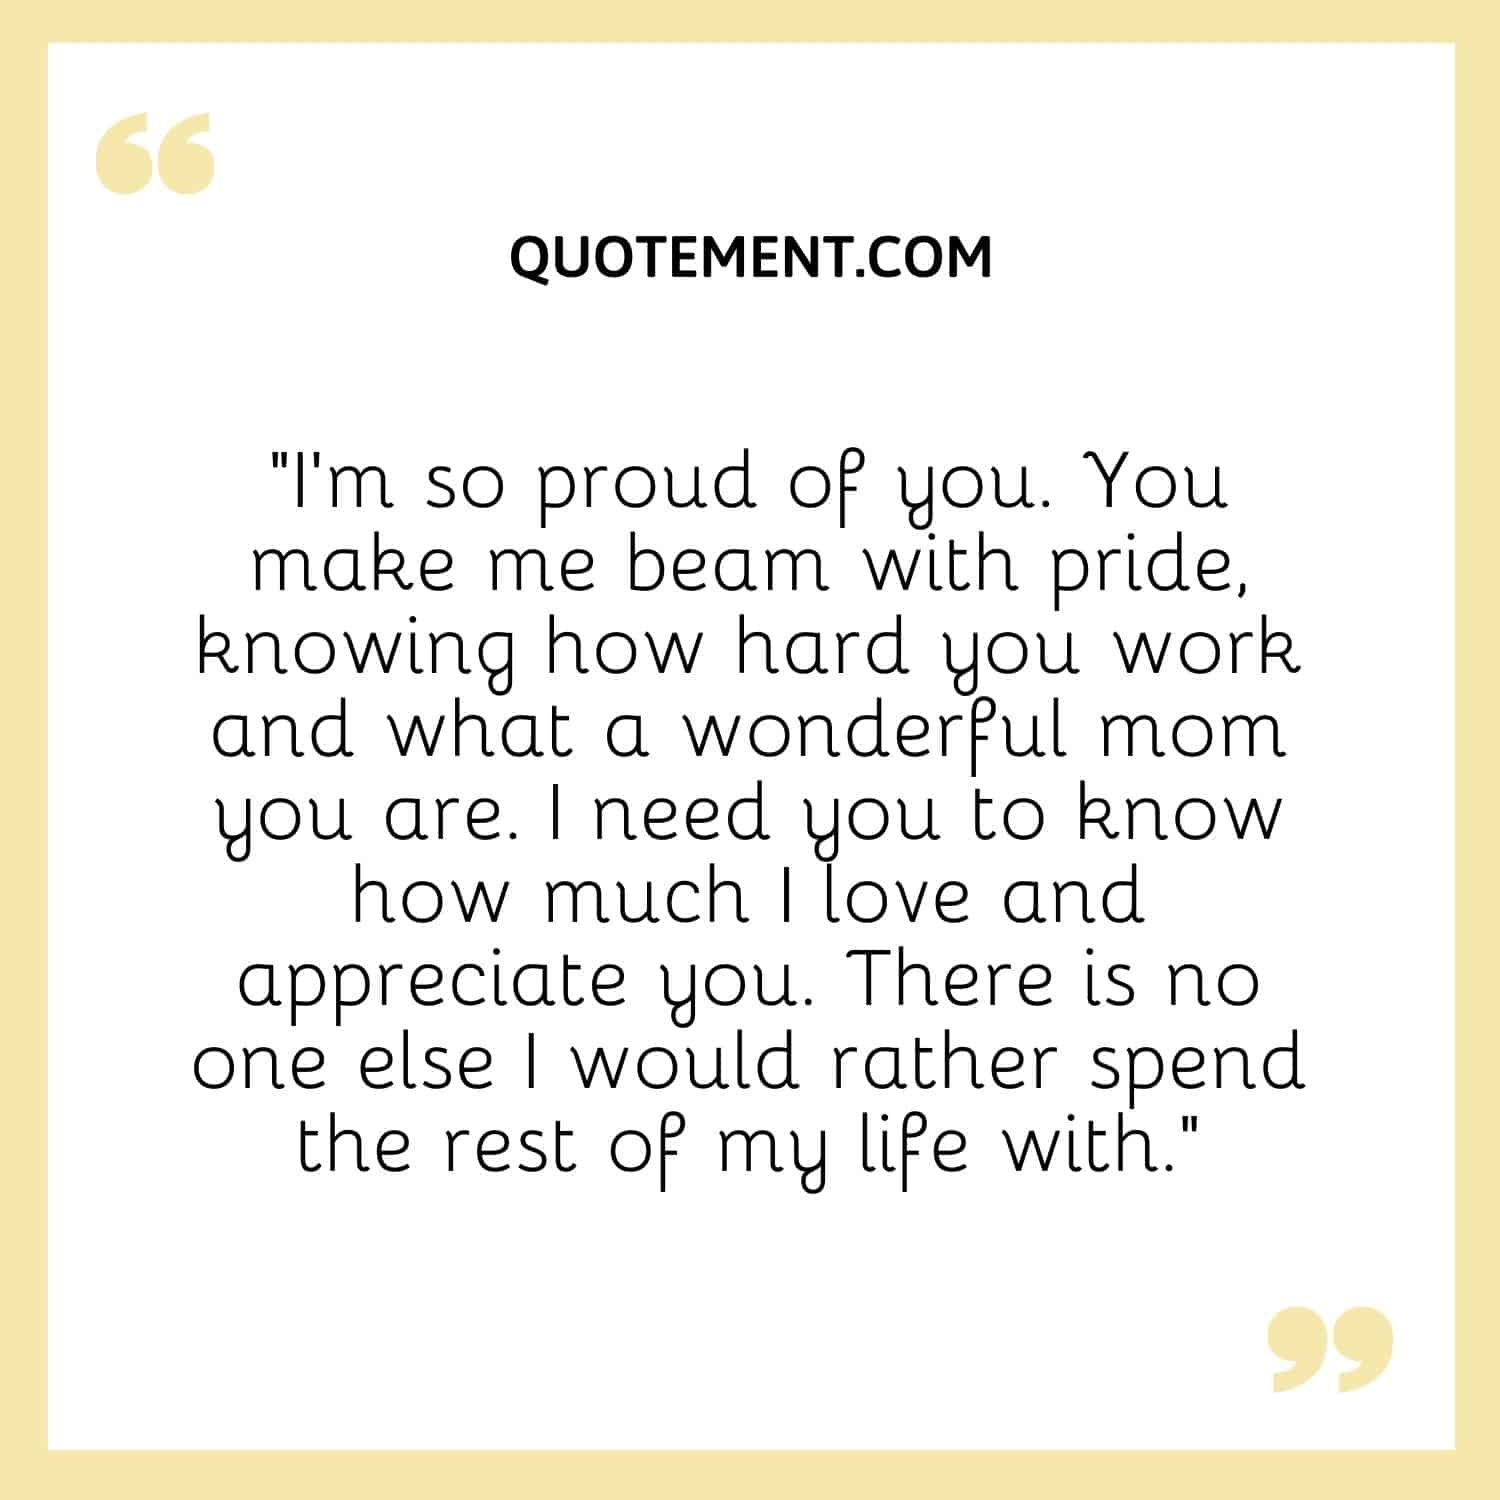 “I’m so proud of you. You make me beam with pride, knowing how hard you work and what a wonderful mom you are.